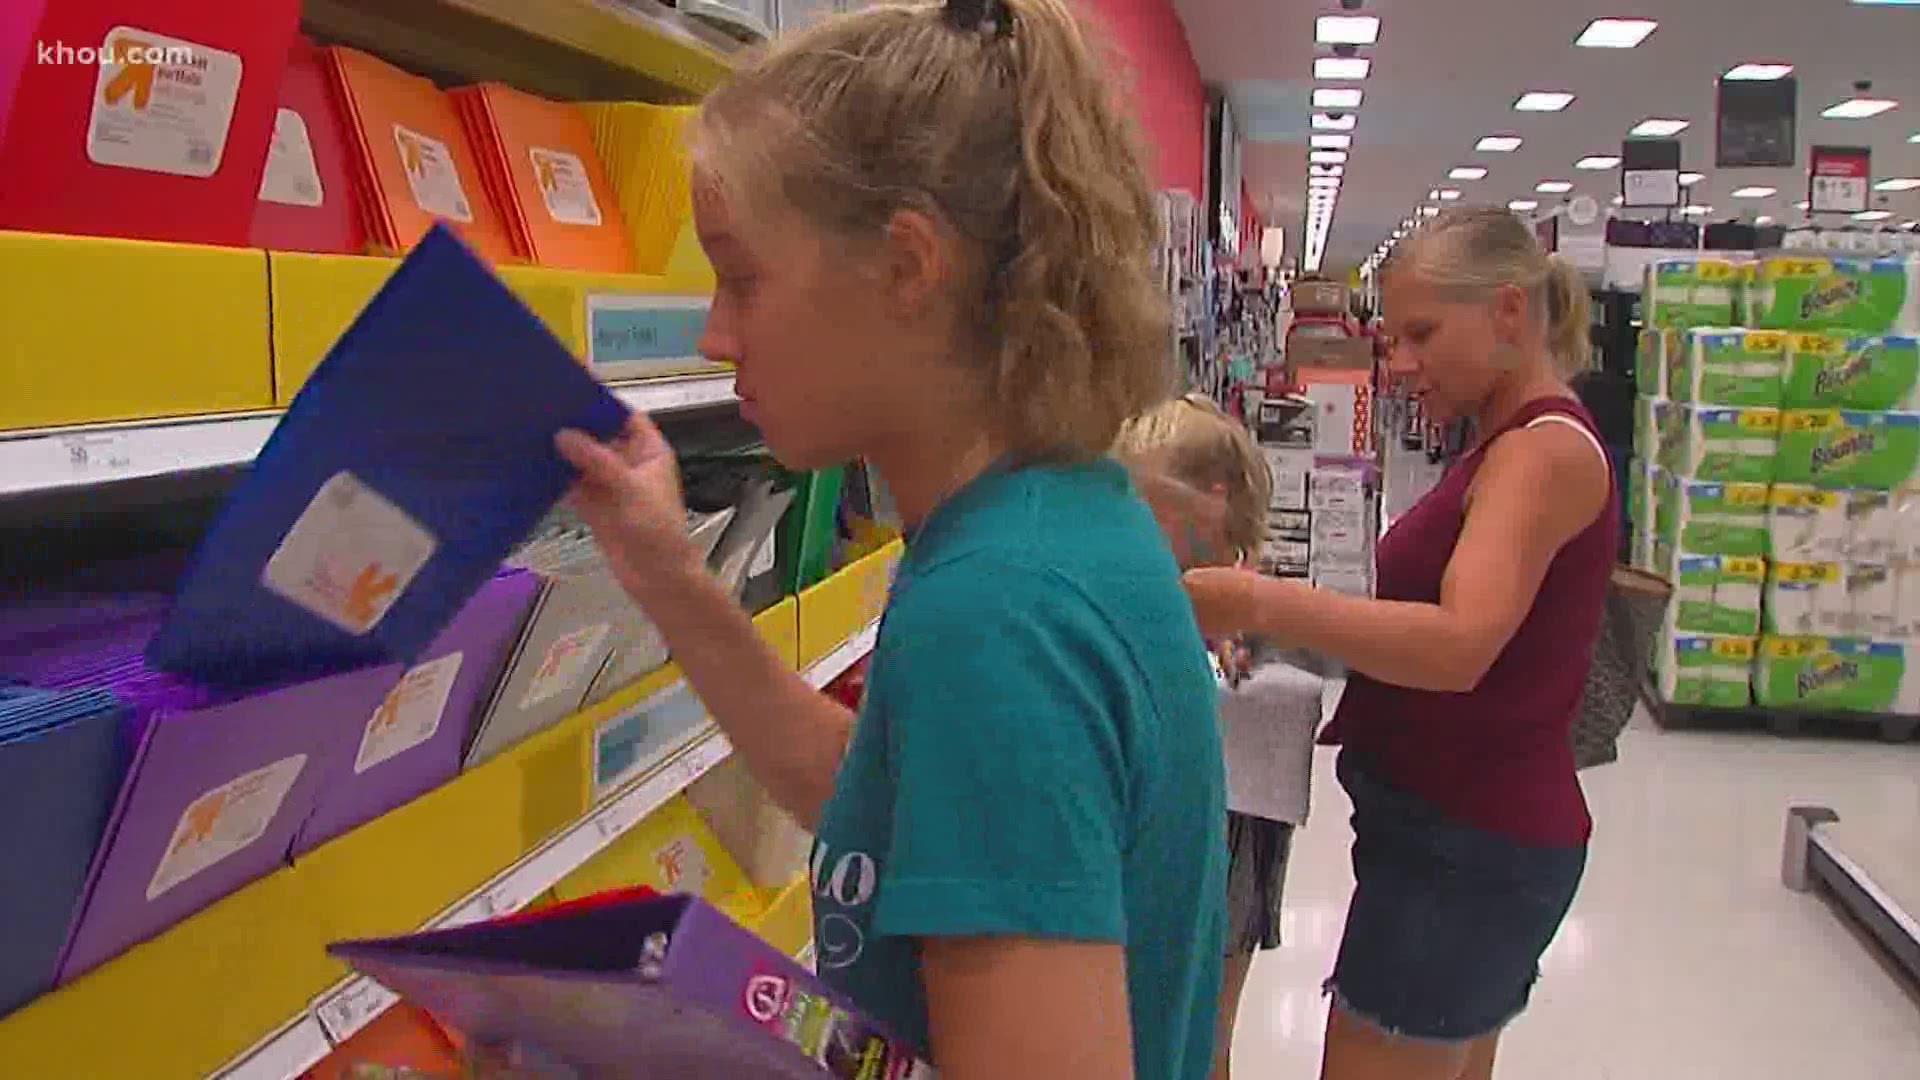 Back-to-school shopping could pull in significantly higher sales than previous years as families buy laptops and other pricey items for remote learning.